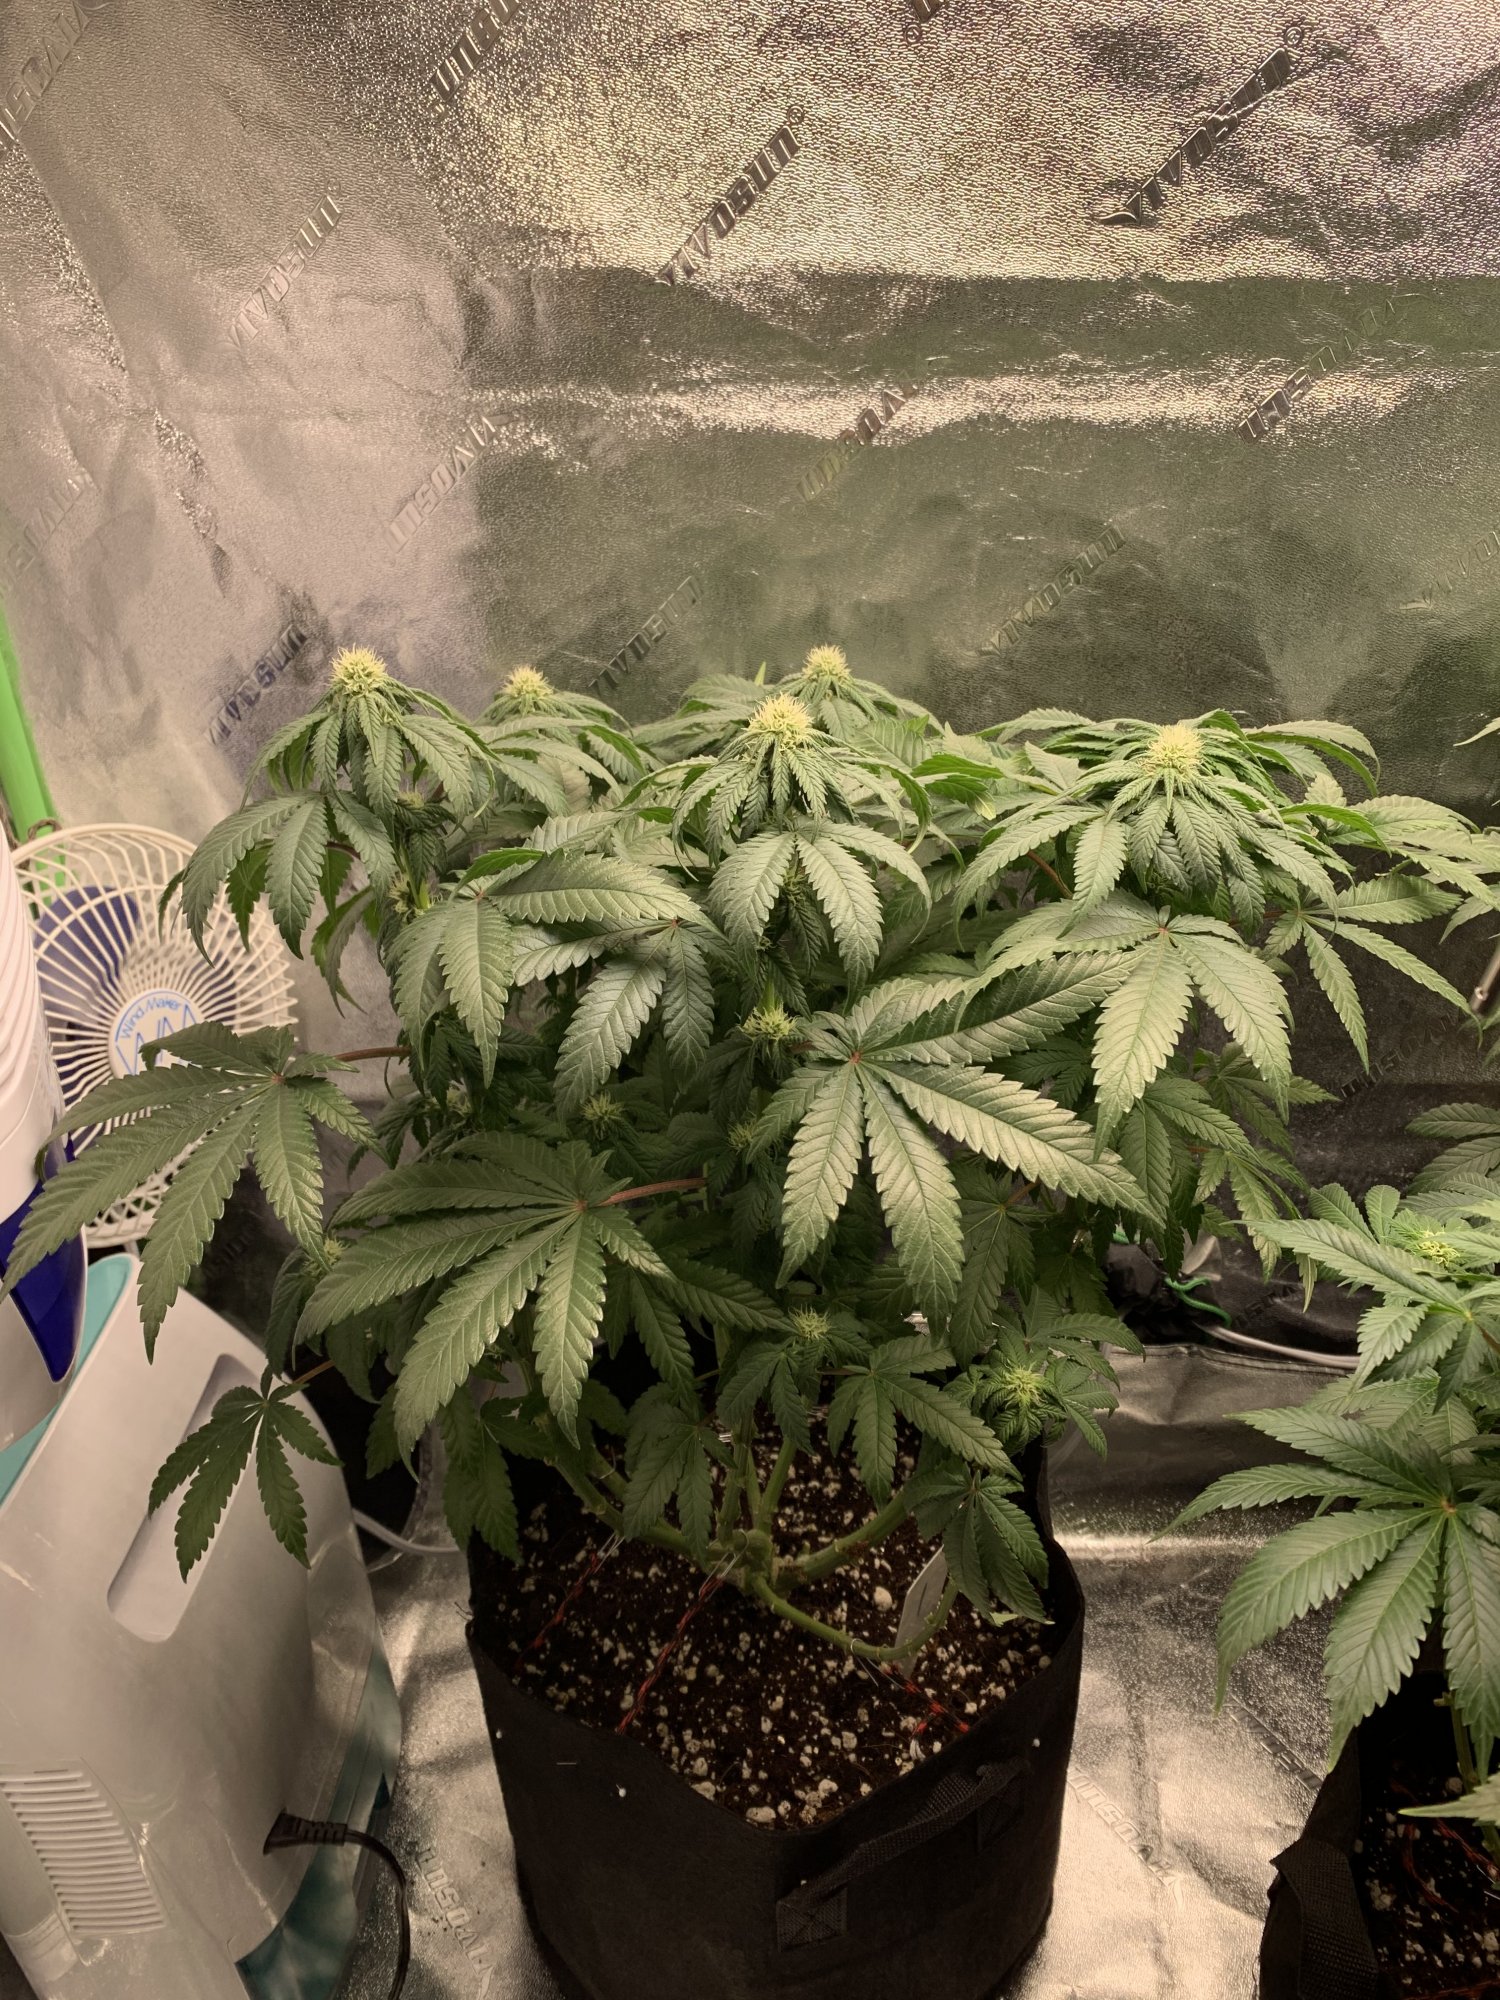 Over watering or a deficiency 4